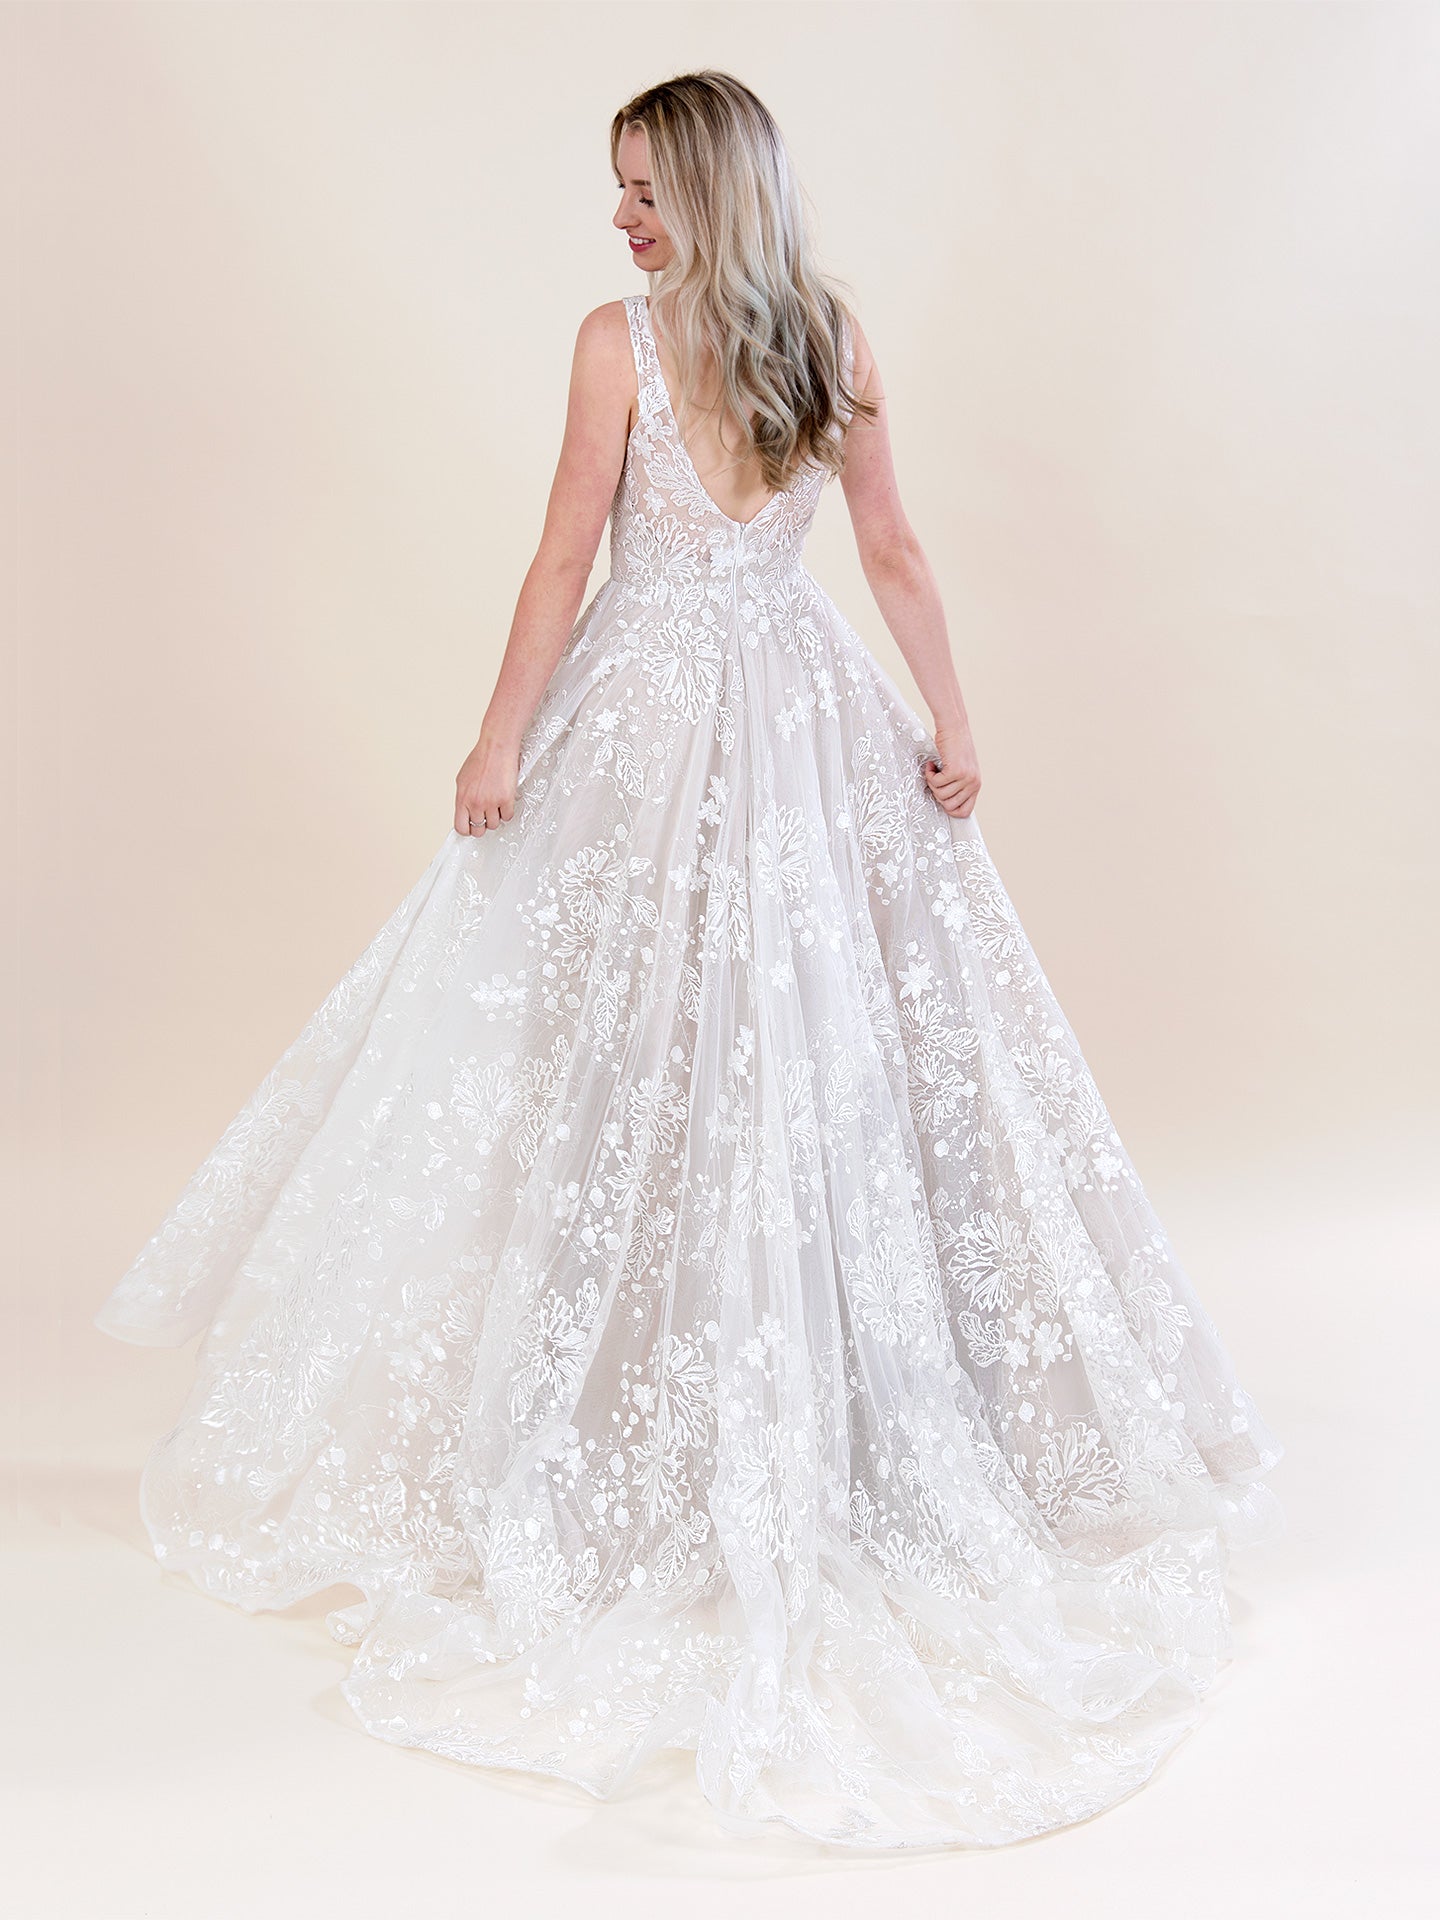 All over lace wedding dress